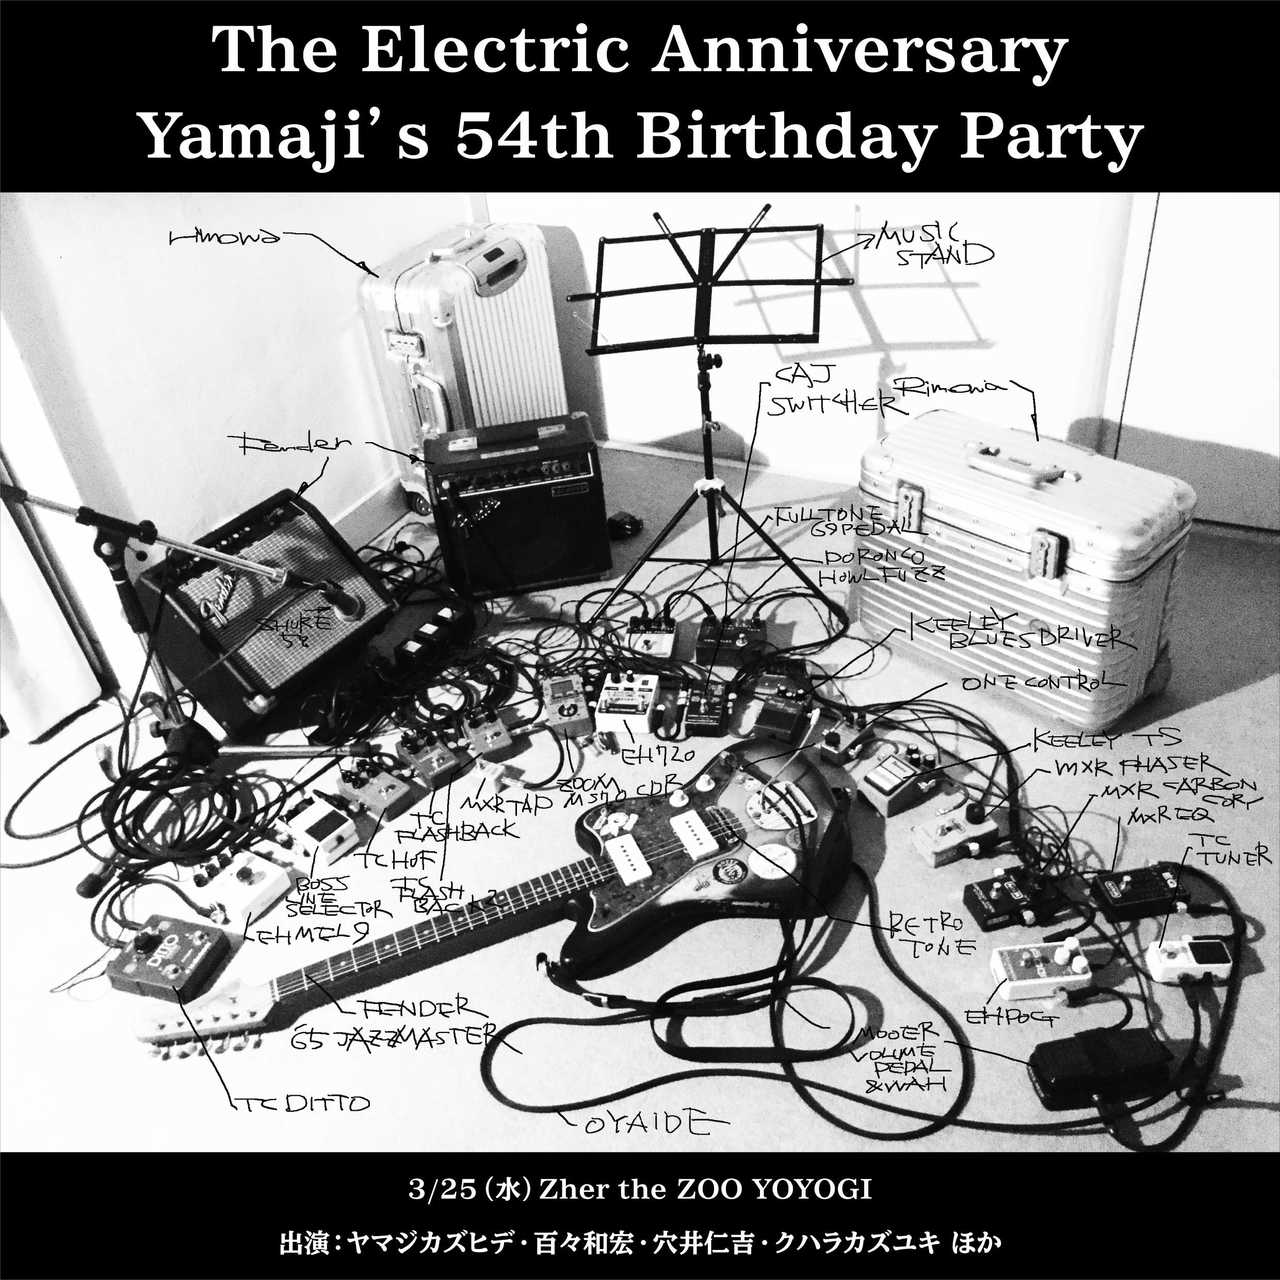 『The Electric Anniversary Yamaji’s 54th Birthday Party』